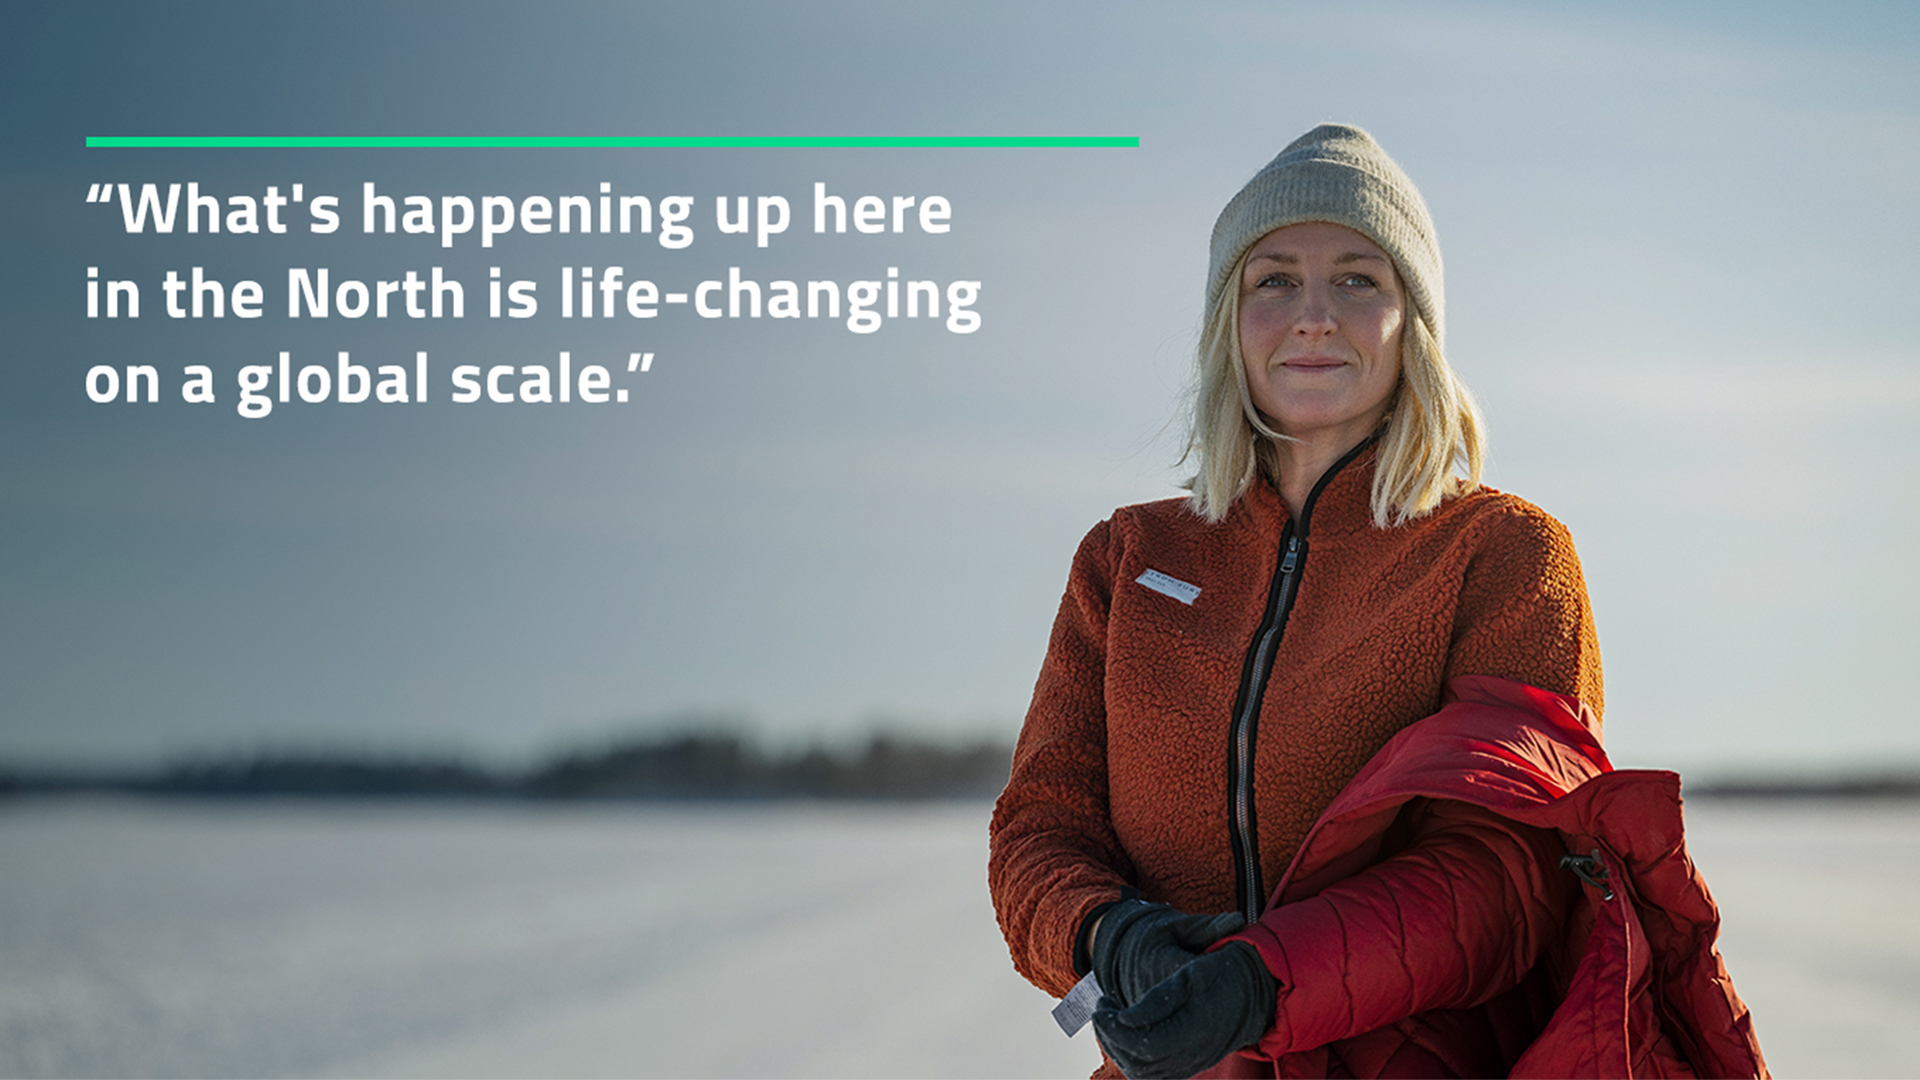 Woman outside in winter, with a quote in the image: "What's happening up here in the North is life-changing on a global scale"